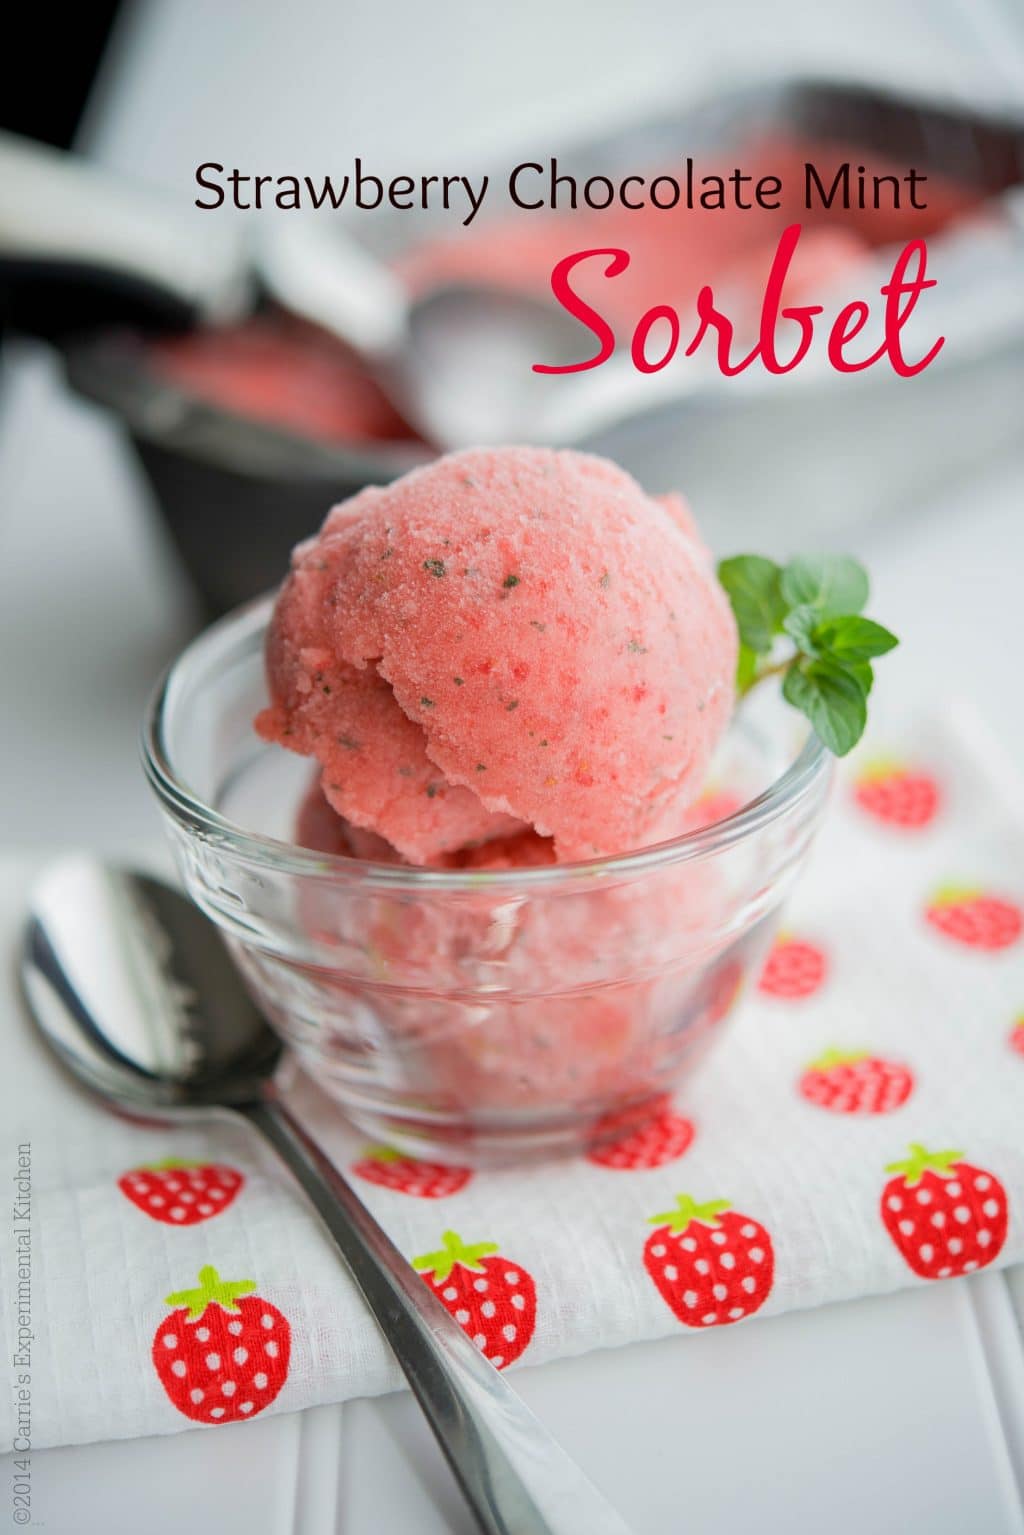 Strawberry Chocolate Mint Sorbet - Carrie’s Experimental Kitchen